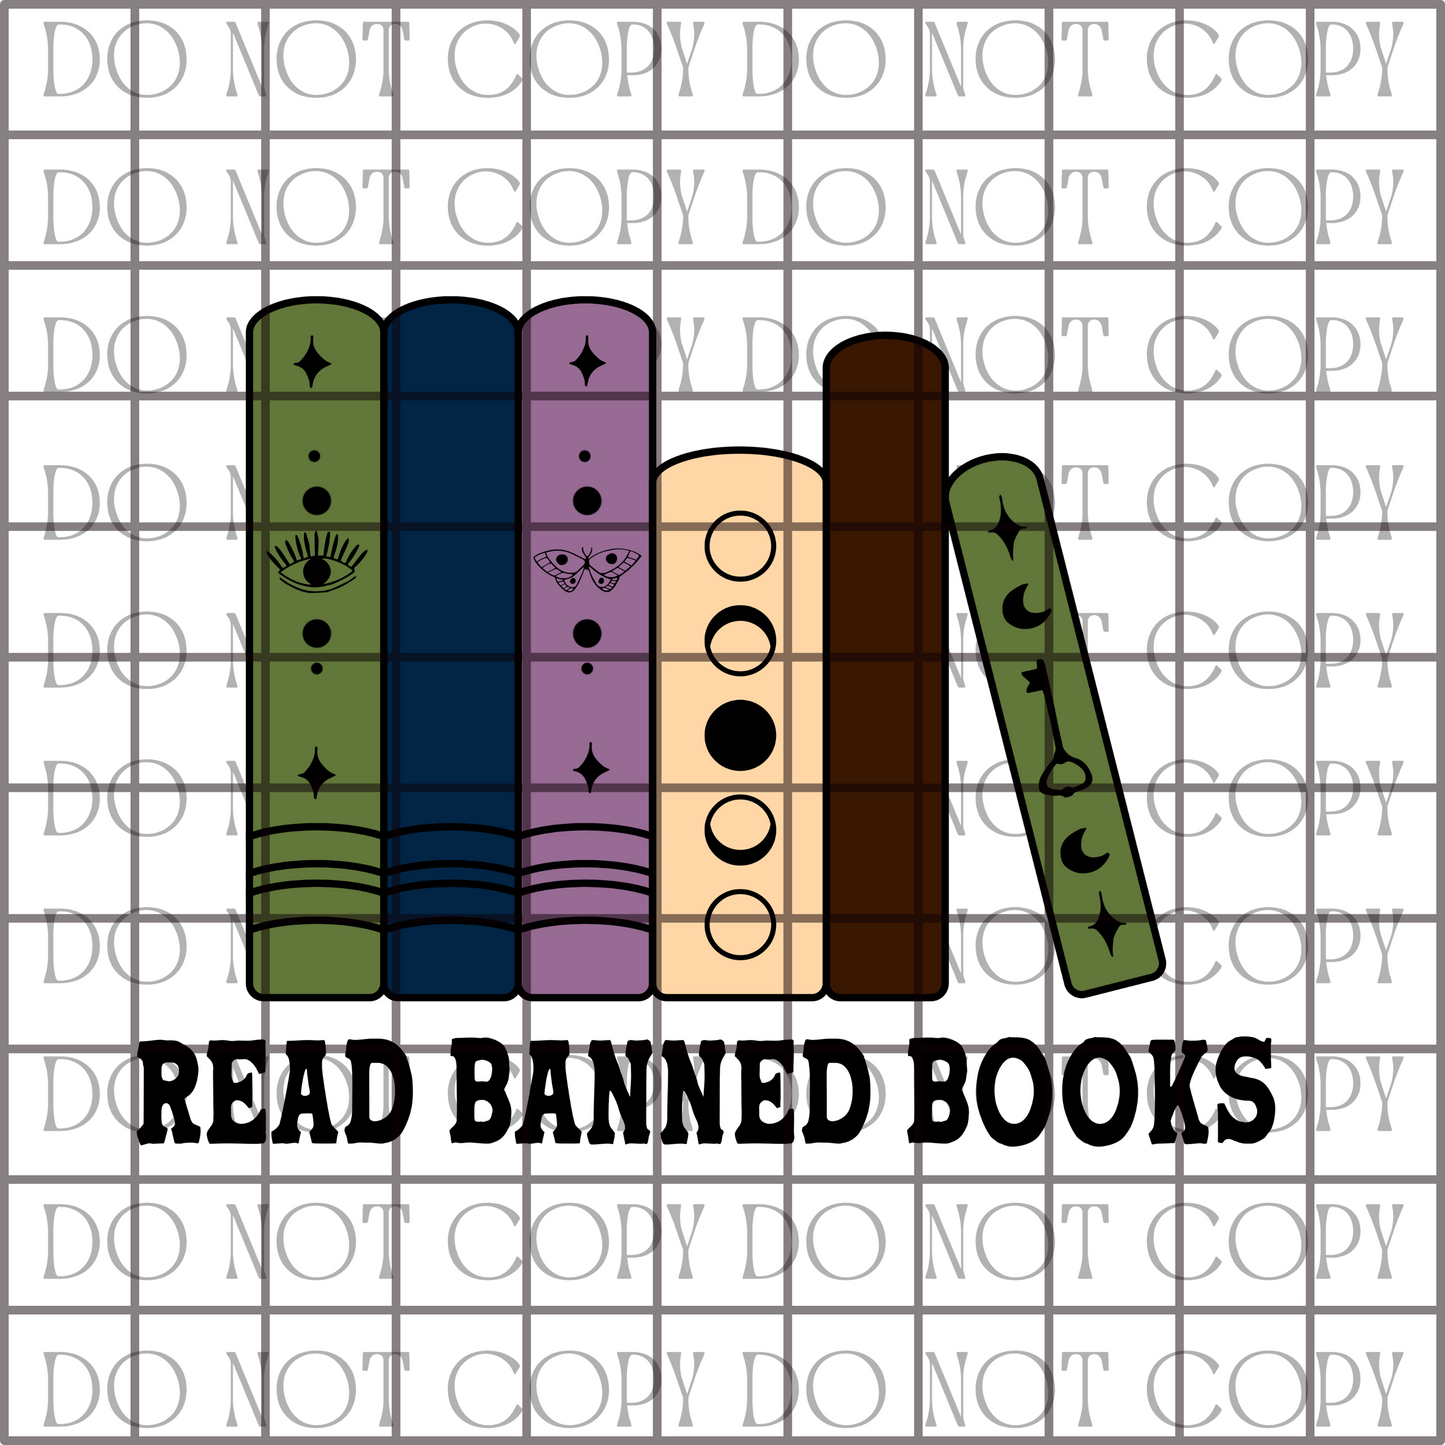 Read Banned Books - Decal